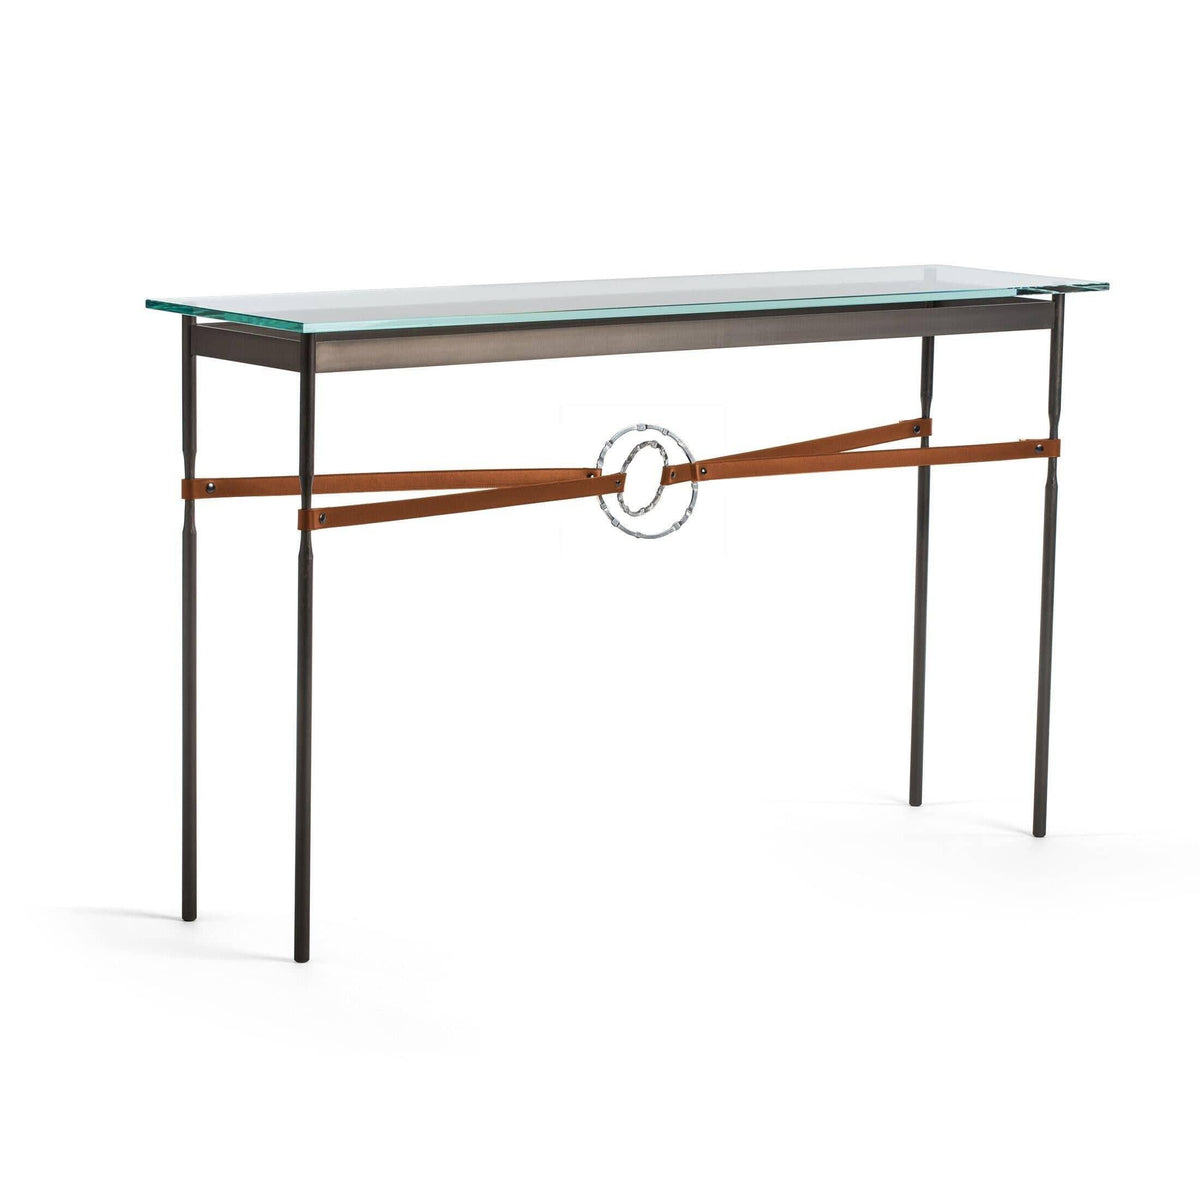 Hubbardton Forge - Equus Chestnut Leather Console Table - 750118-07-85-LC-VA0714 | Montreal Lighting & Hardware